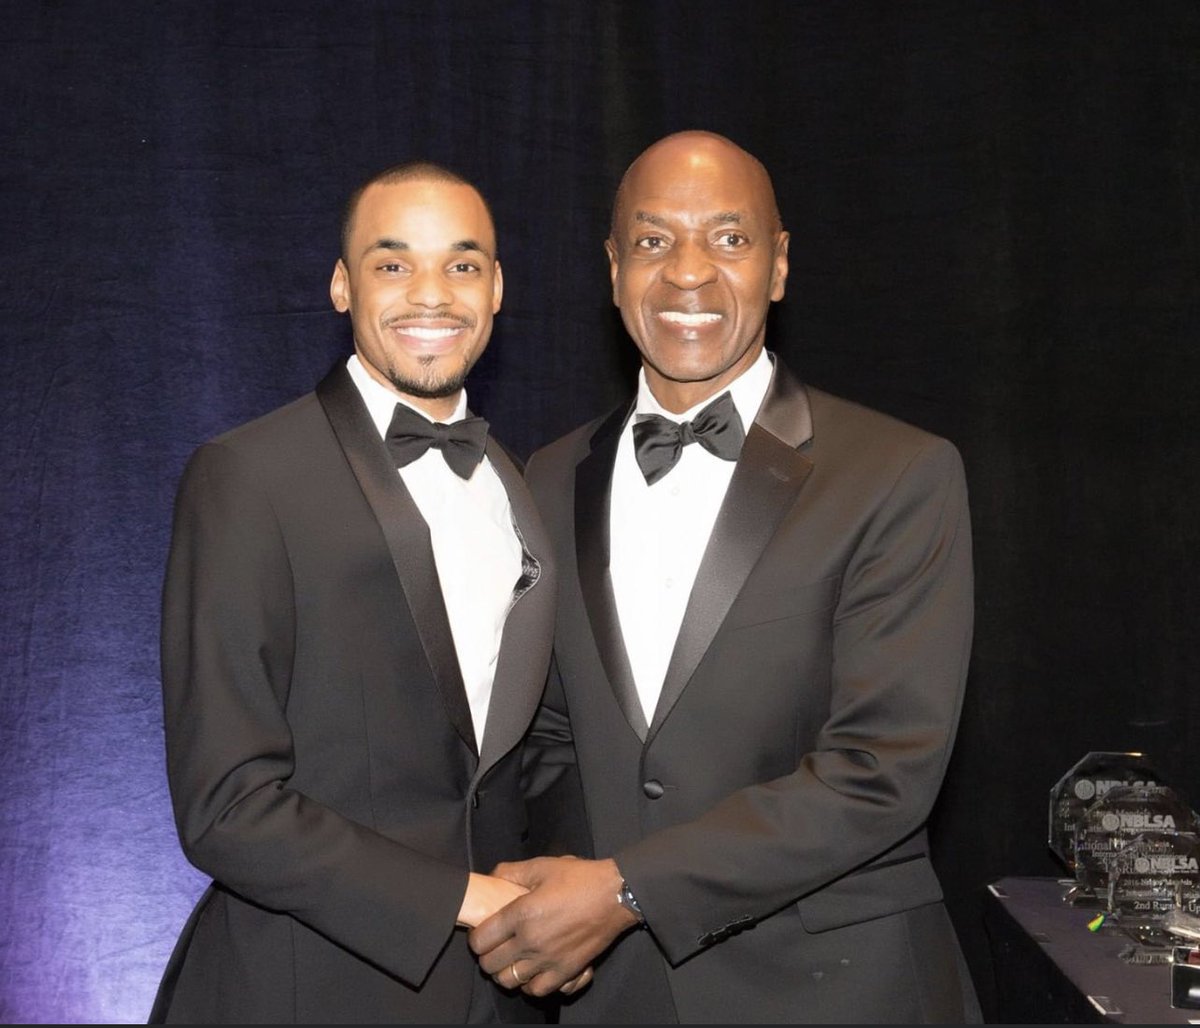 When I was a law student and national chair of @NBLSA, I had the great fortune of spending time with @Harvard_Law Professor Ogletree and honoring him with NBLSA’s Lifetime Achievement Award. Thank you for inspiring me and generations of lawyers.